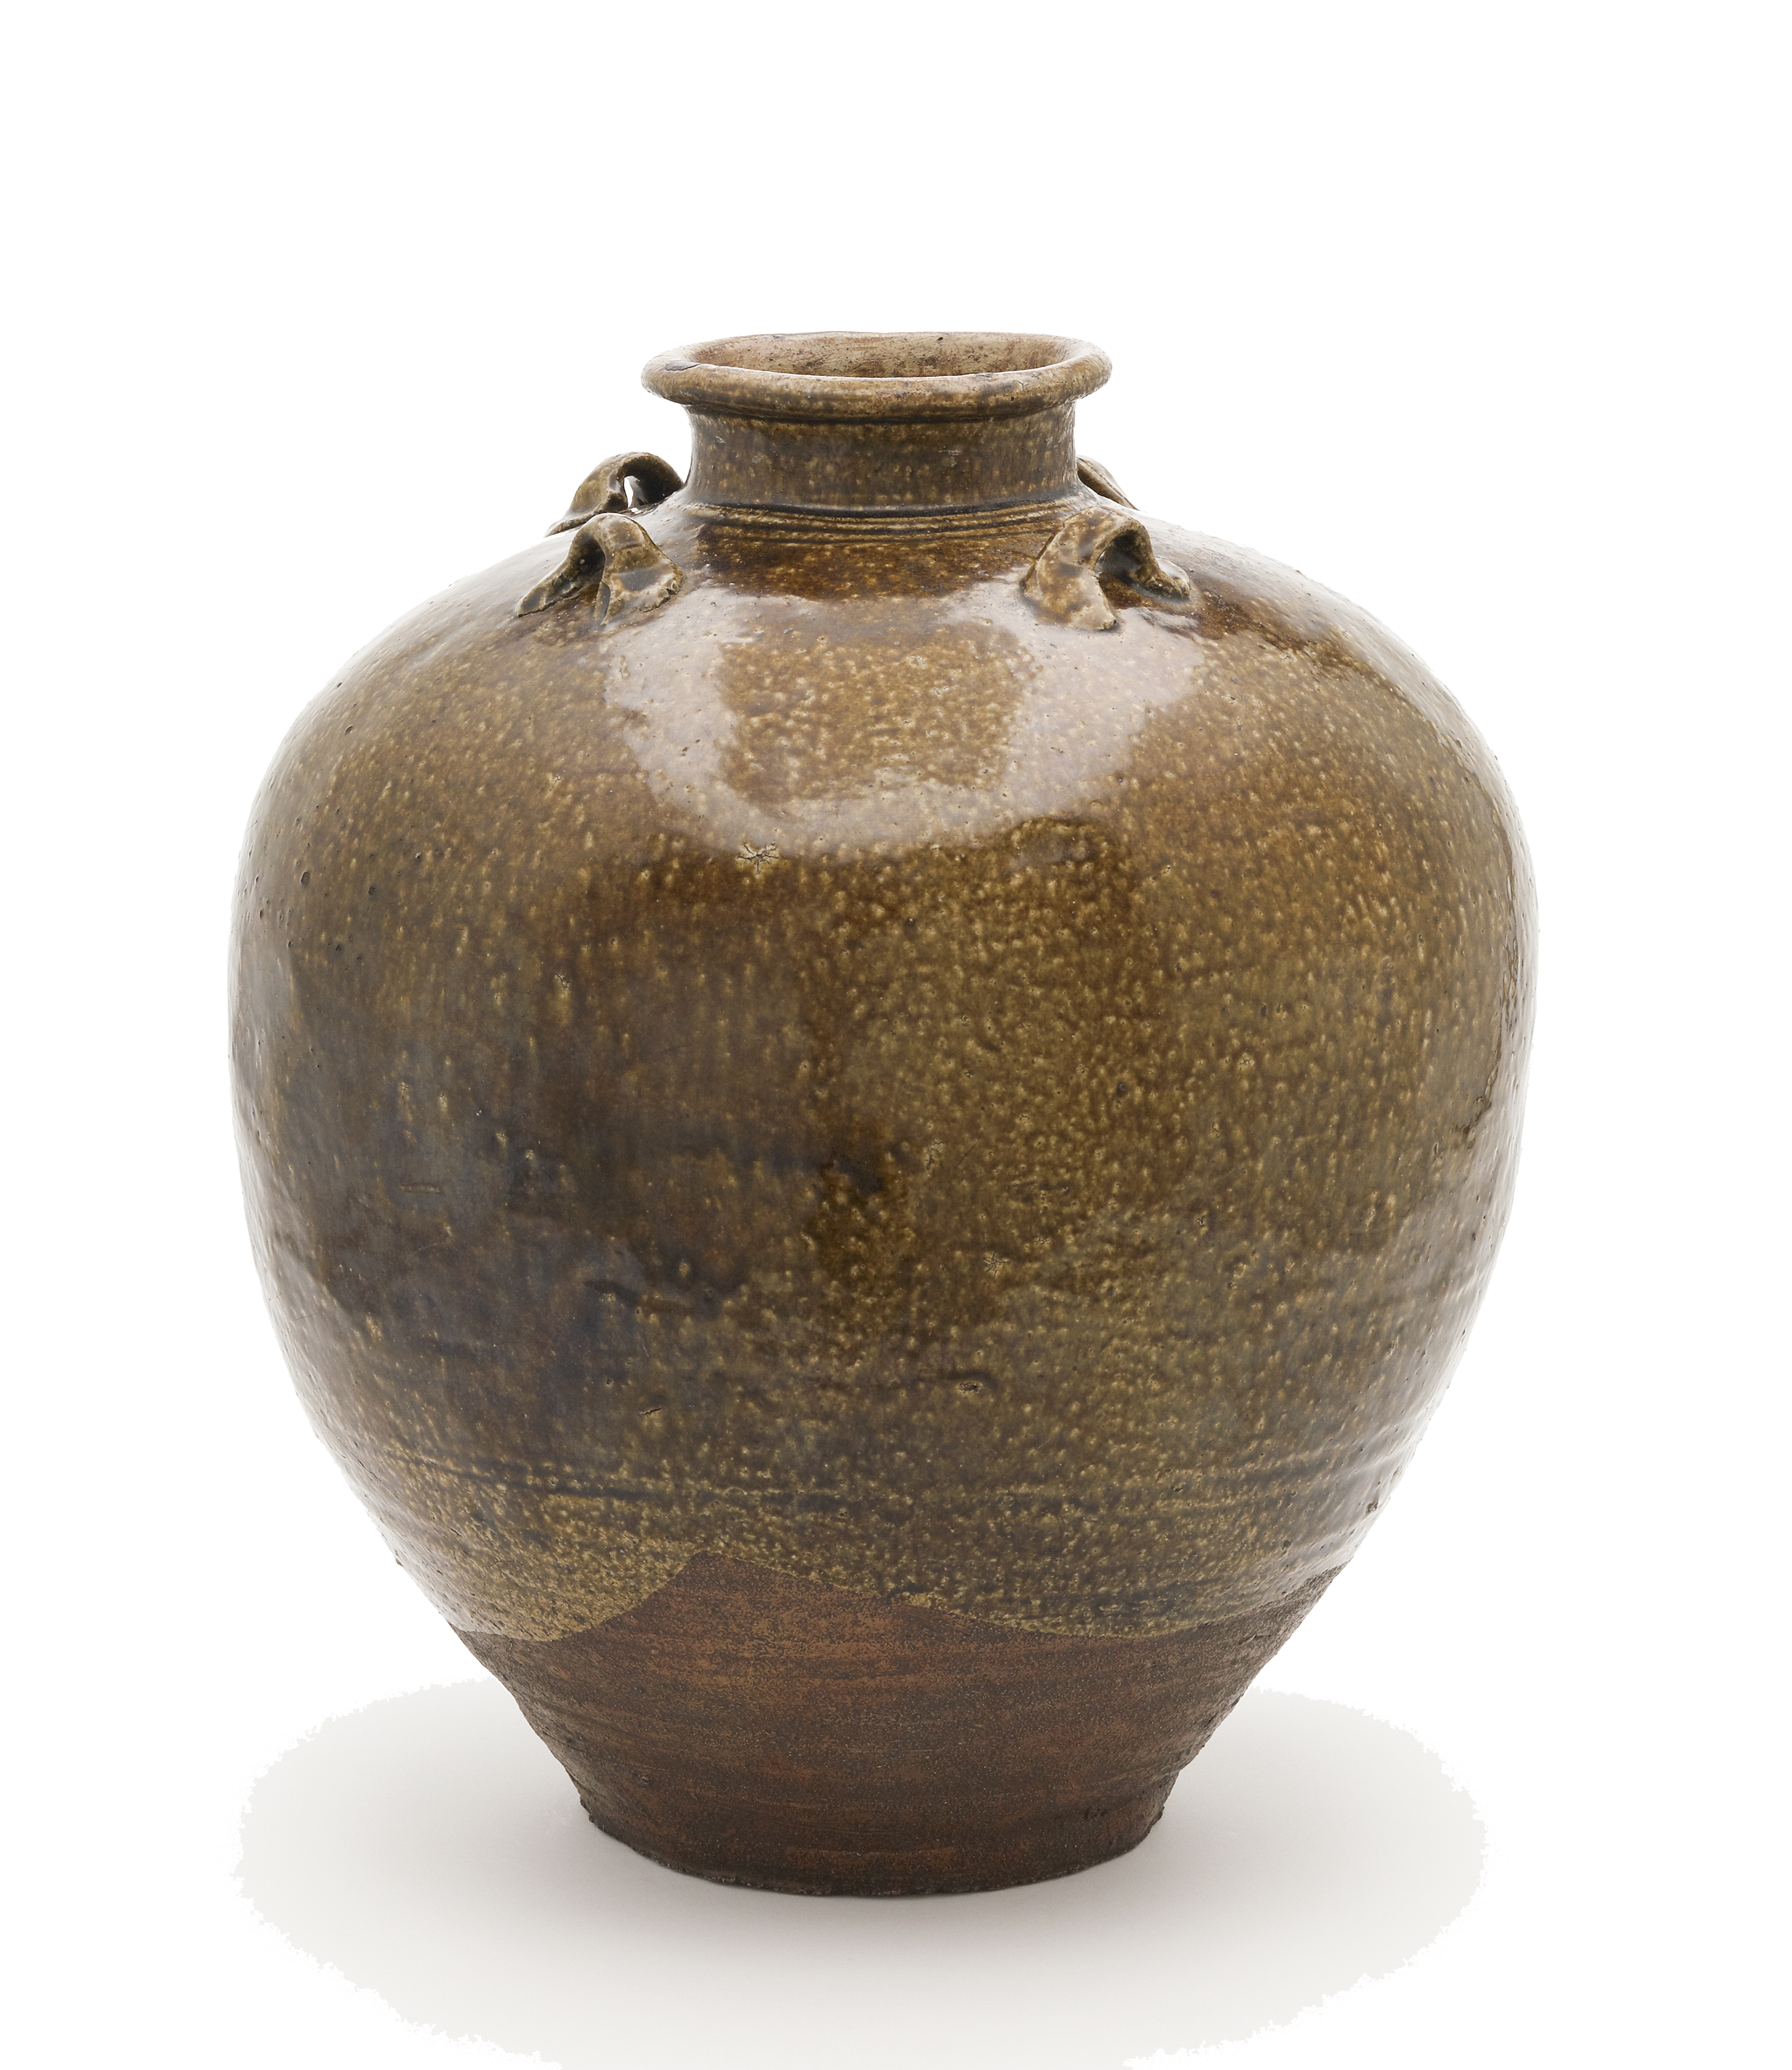 Tea-leaf storage jar named Chigusa China, probably Guangdong Province, Southern Song or Yuan dynasty, mid-13th to mid-14th c. Stoneware with iron glaze H: 41.6 cm. Photo Credit: Courtesy Freer Gallery of Art.